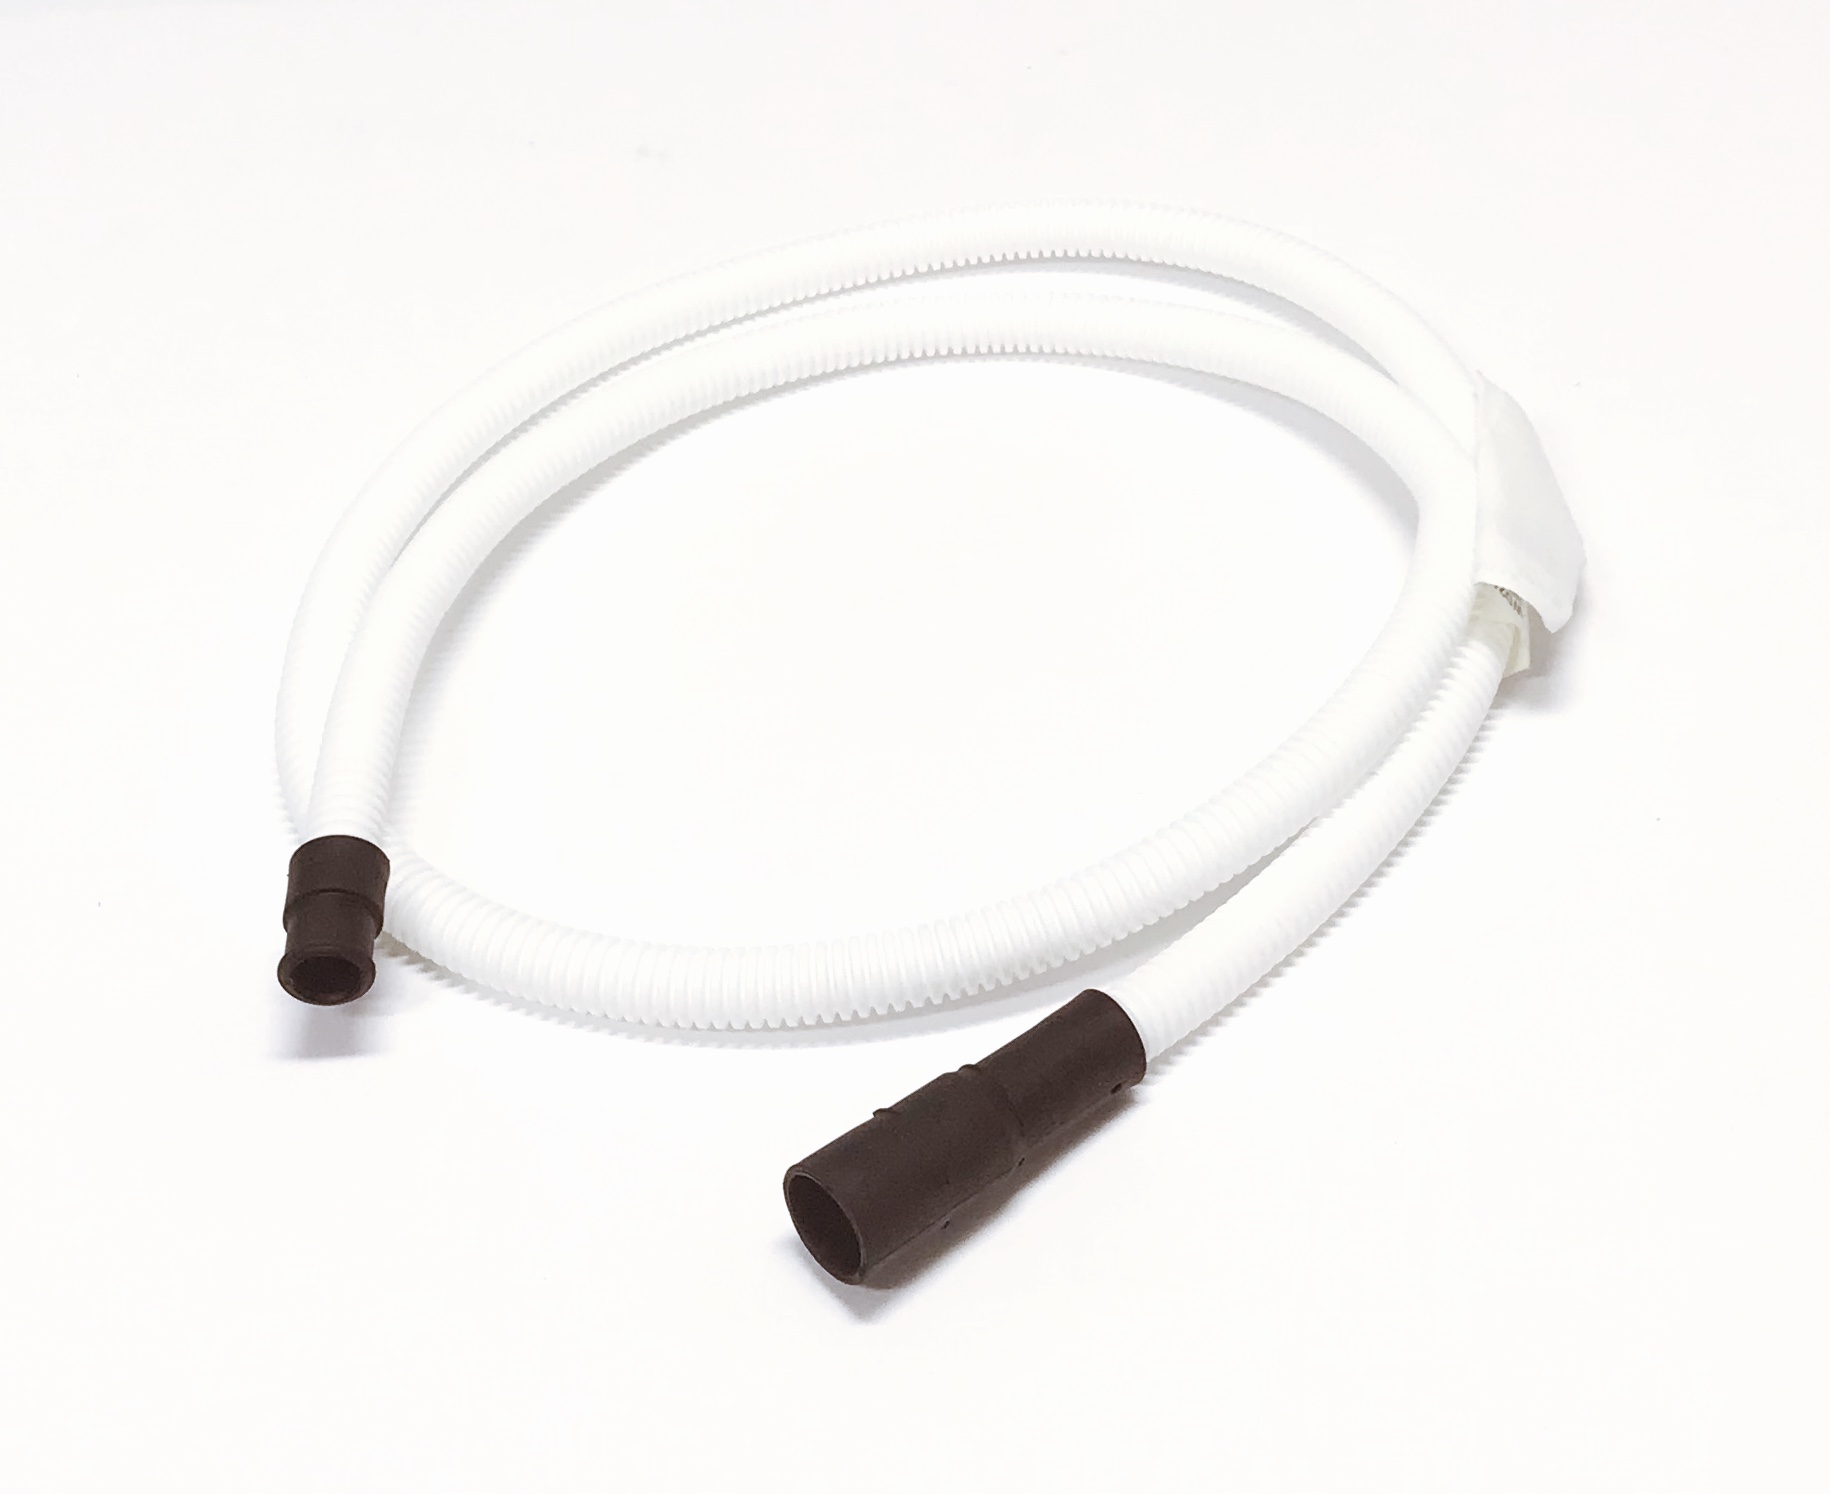 GE OEM GE Dishwasher Drain Hose Originally Shipped With GSD1150T55, GSD1150T60, GSD1150T62, GSD1150T64